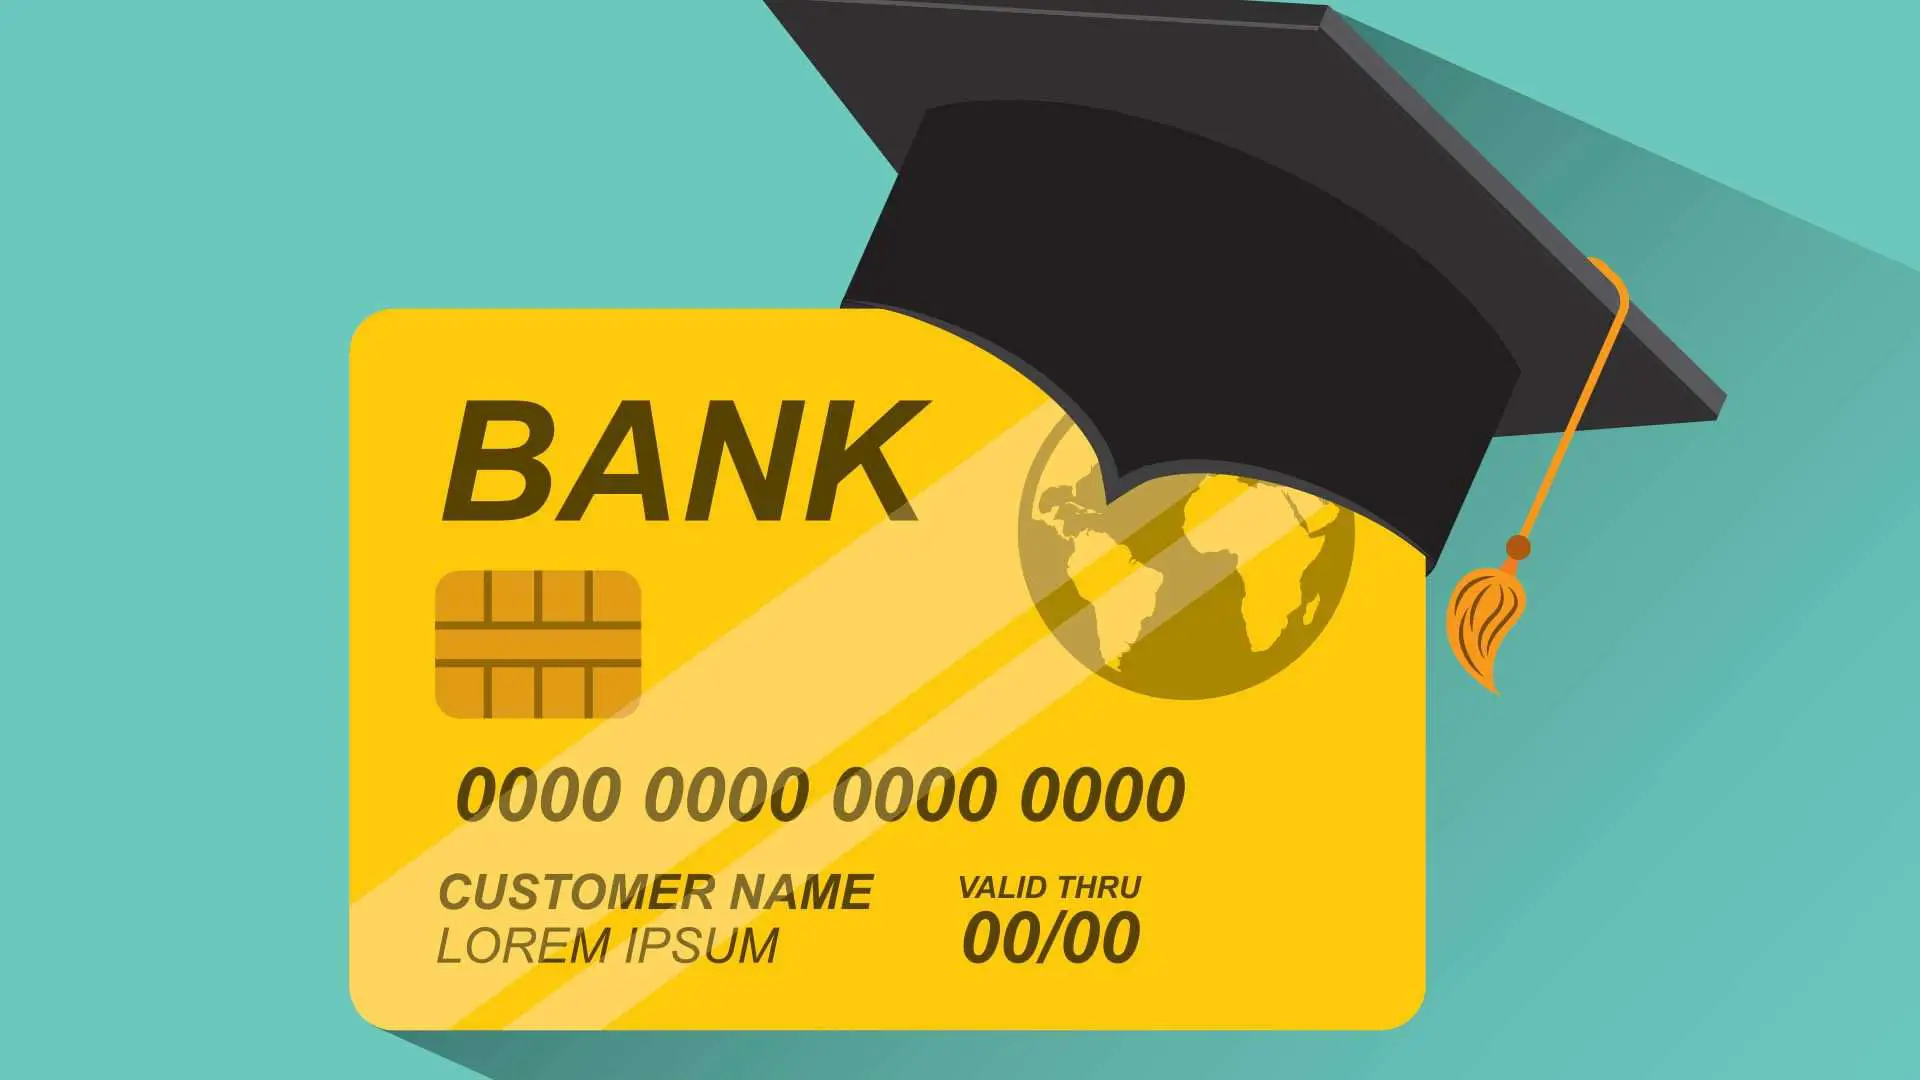 Can I pay off my student loans with a credit card?